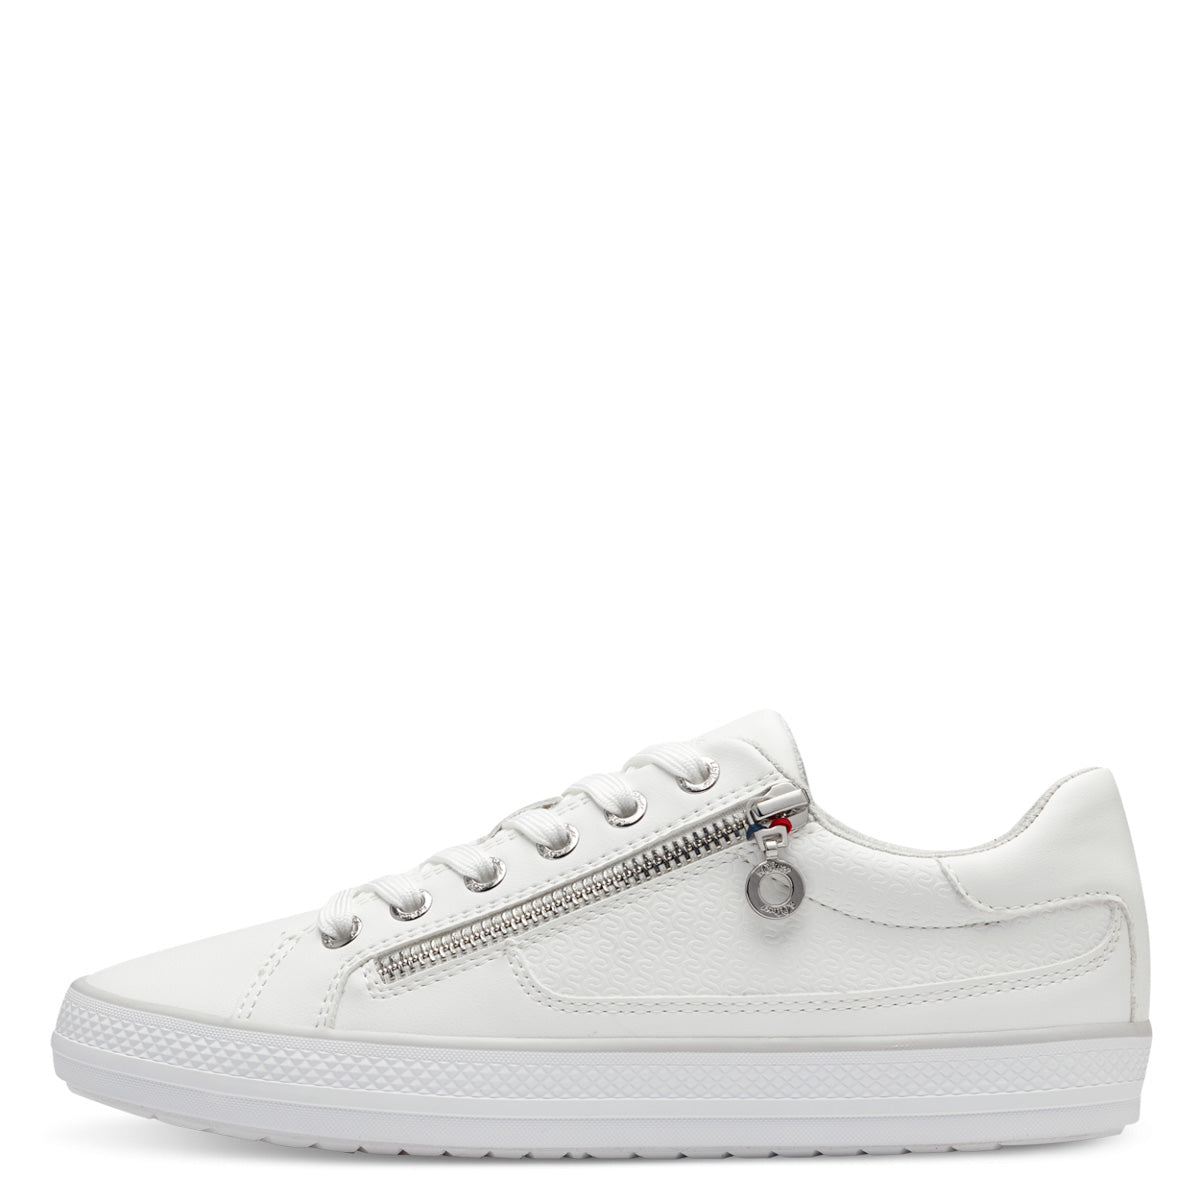 Front view of S.Oliver White Runner Style Sneakers with a rounded toe and white laces.